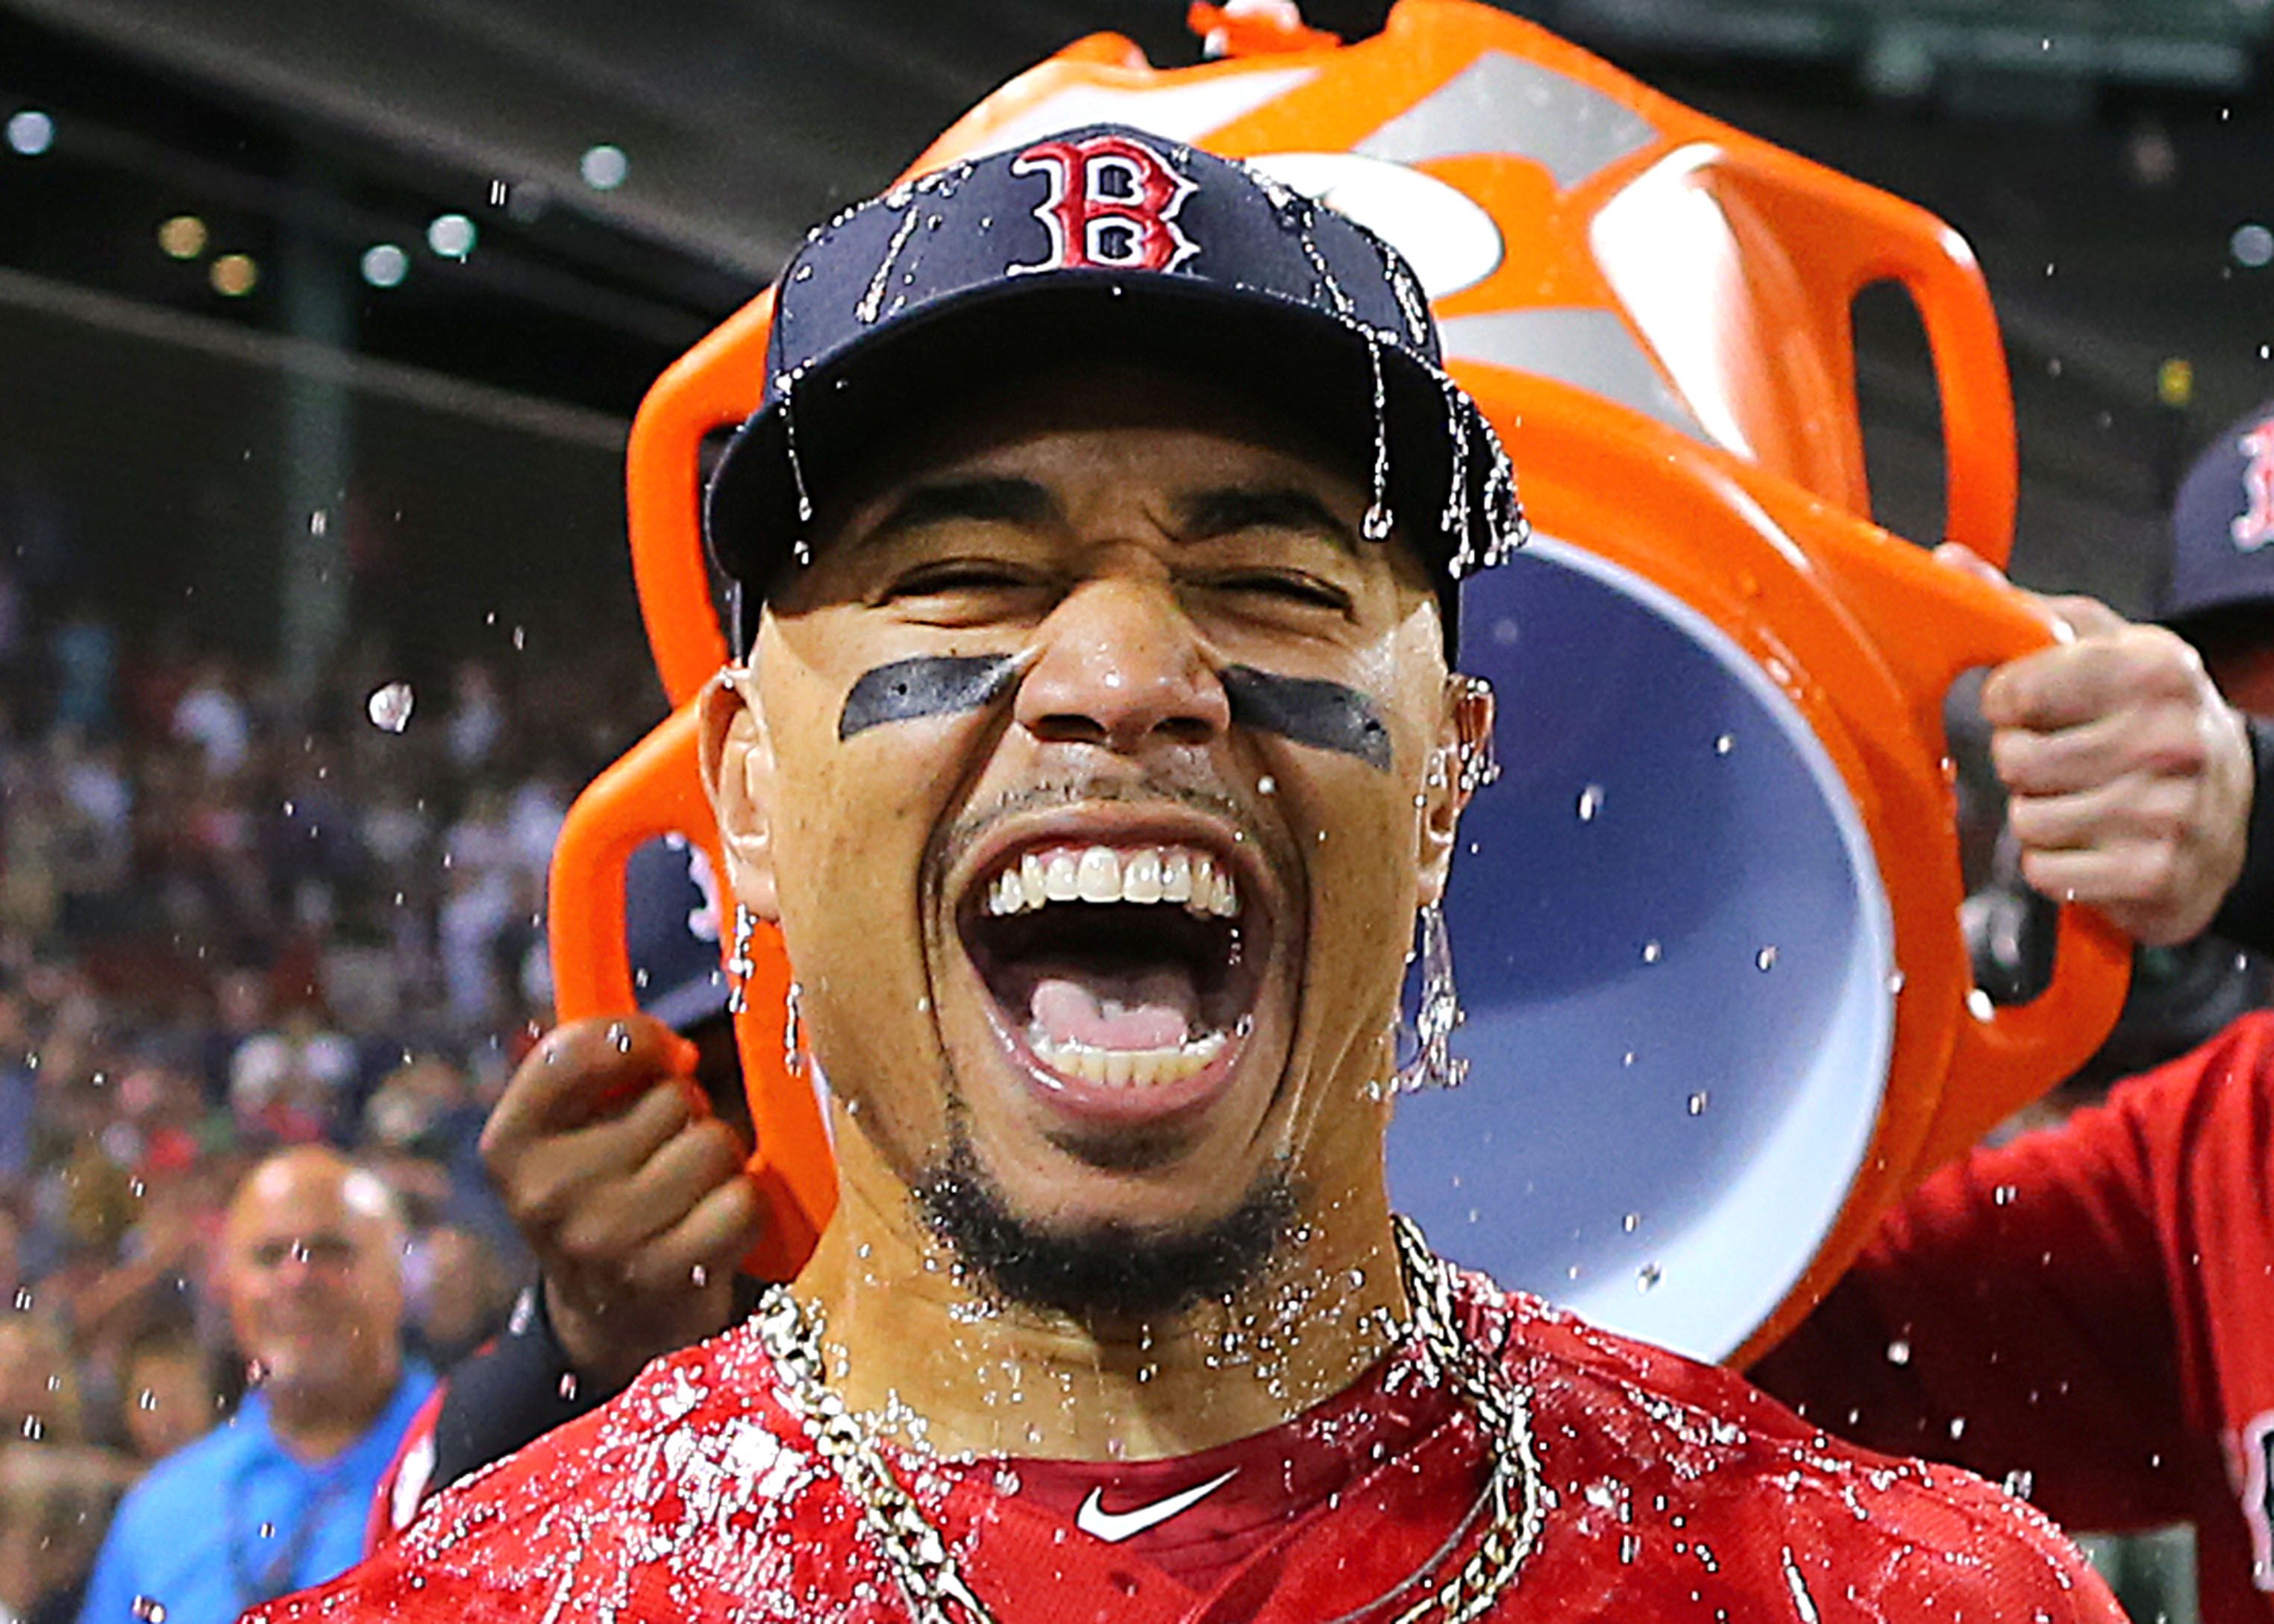 Here's how Mookie Betts's golf cart ended up in a pond - The Boston Globe